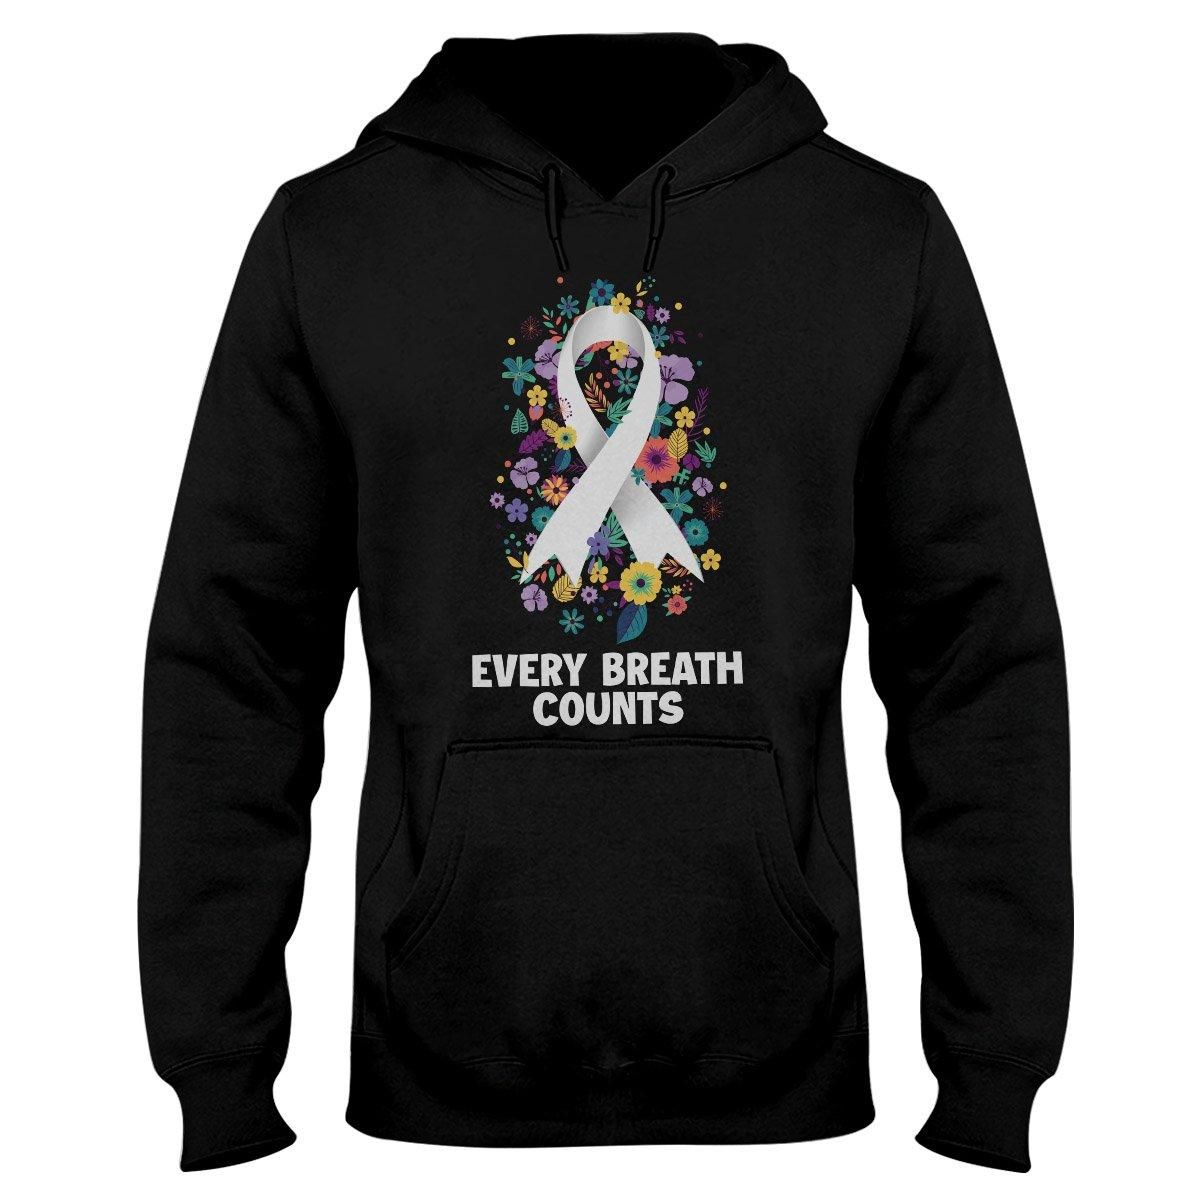 Every Breath Counts Lung Cancer Awareness Hoodie PAN2HD0045